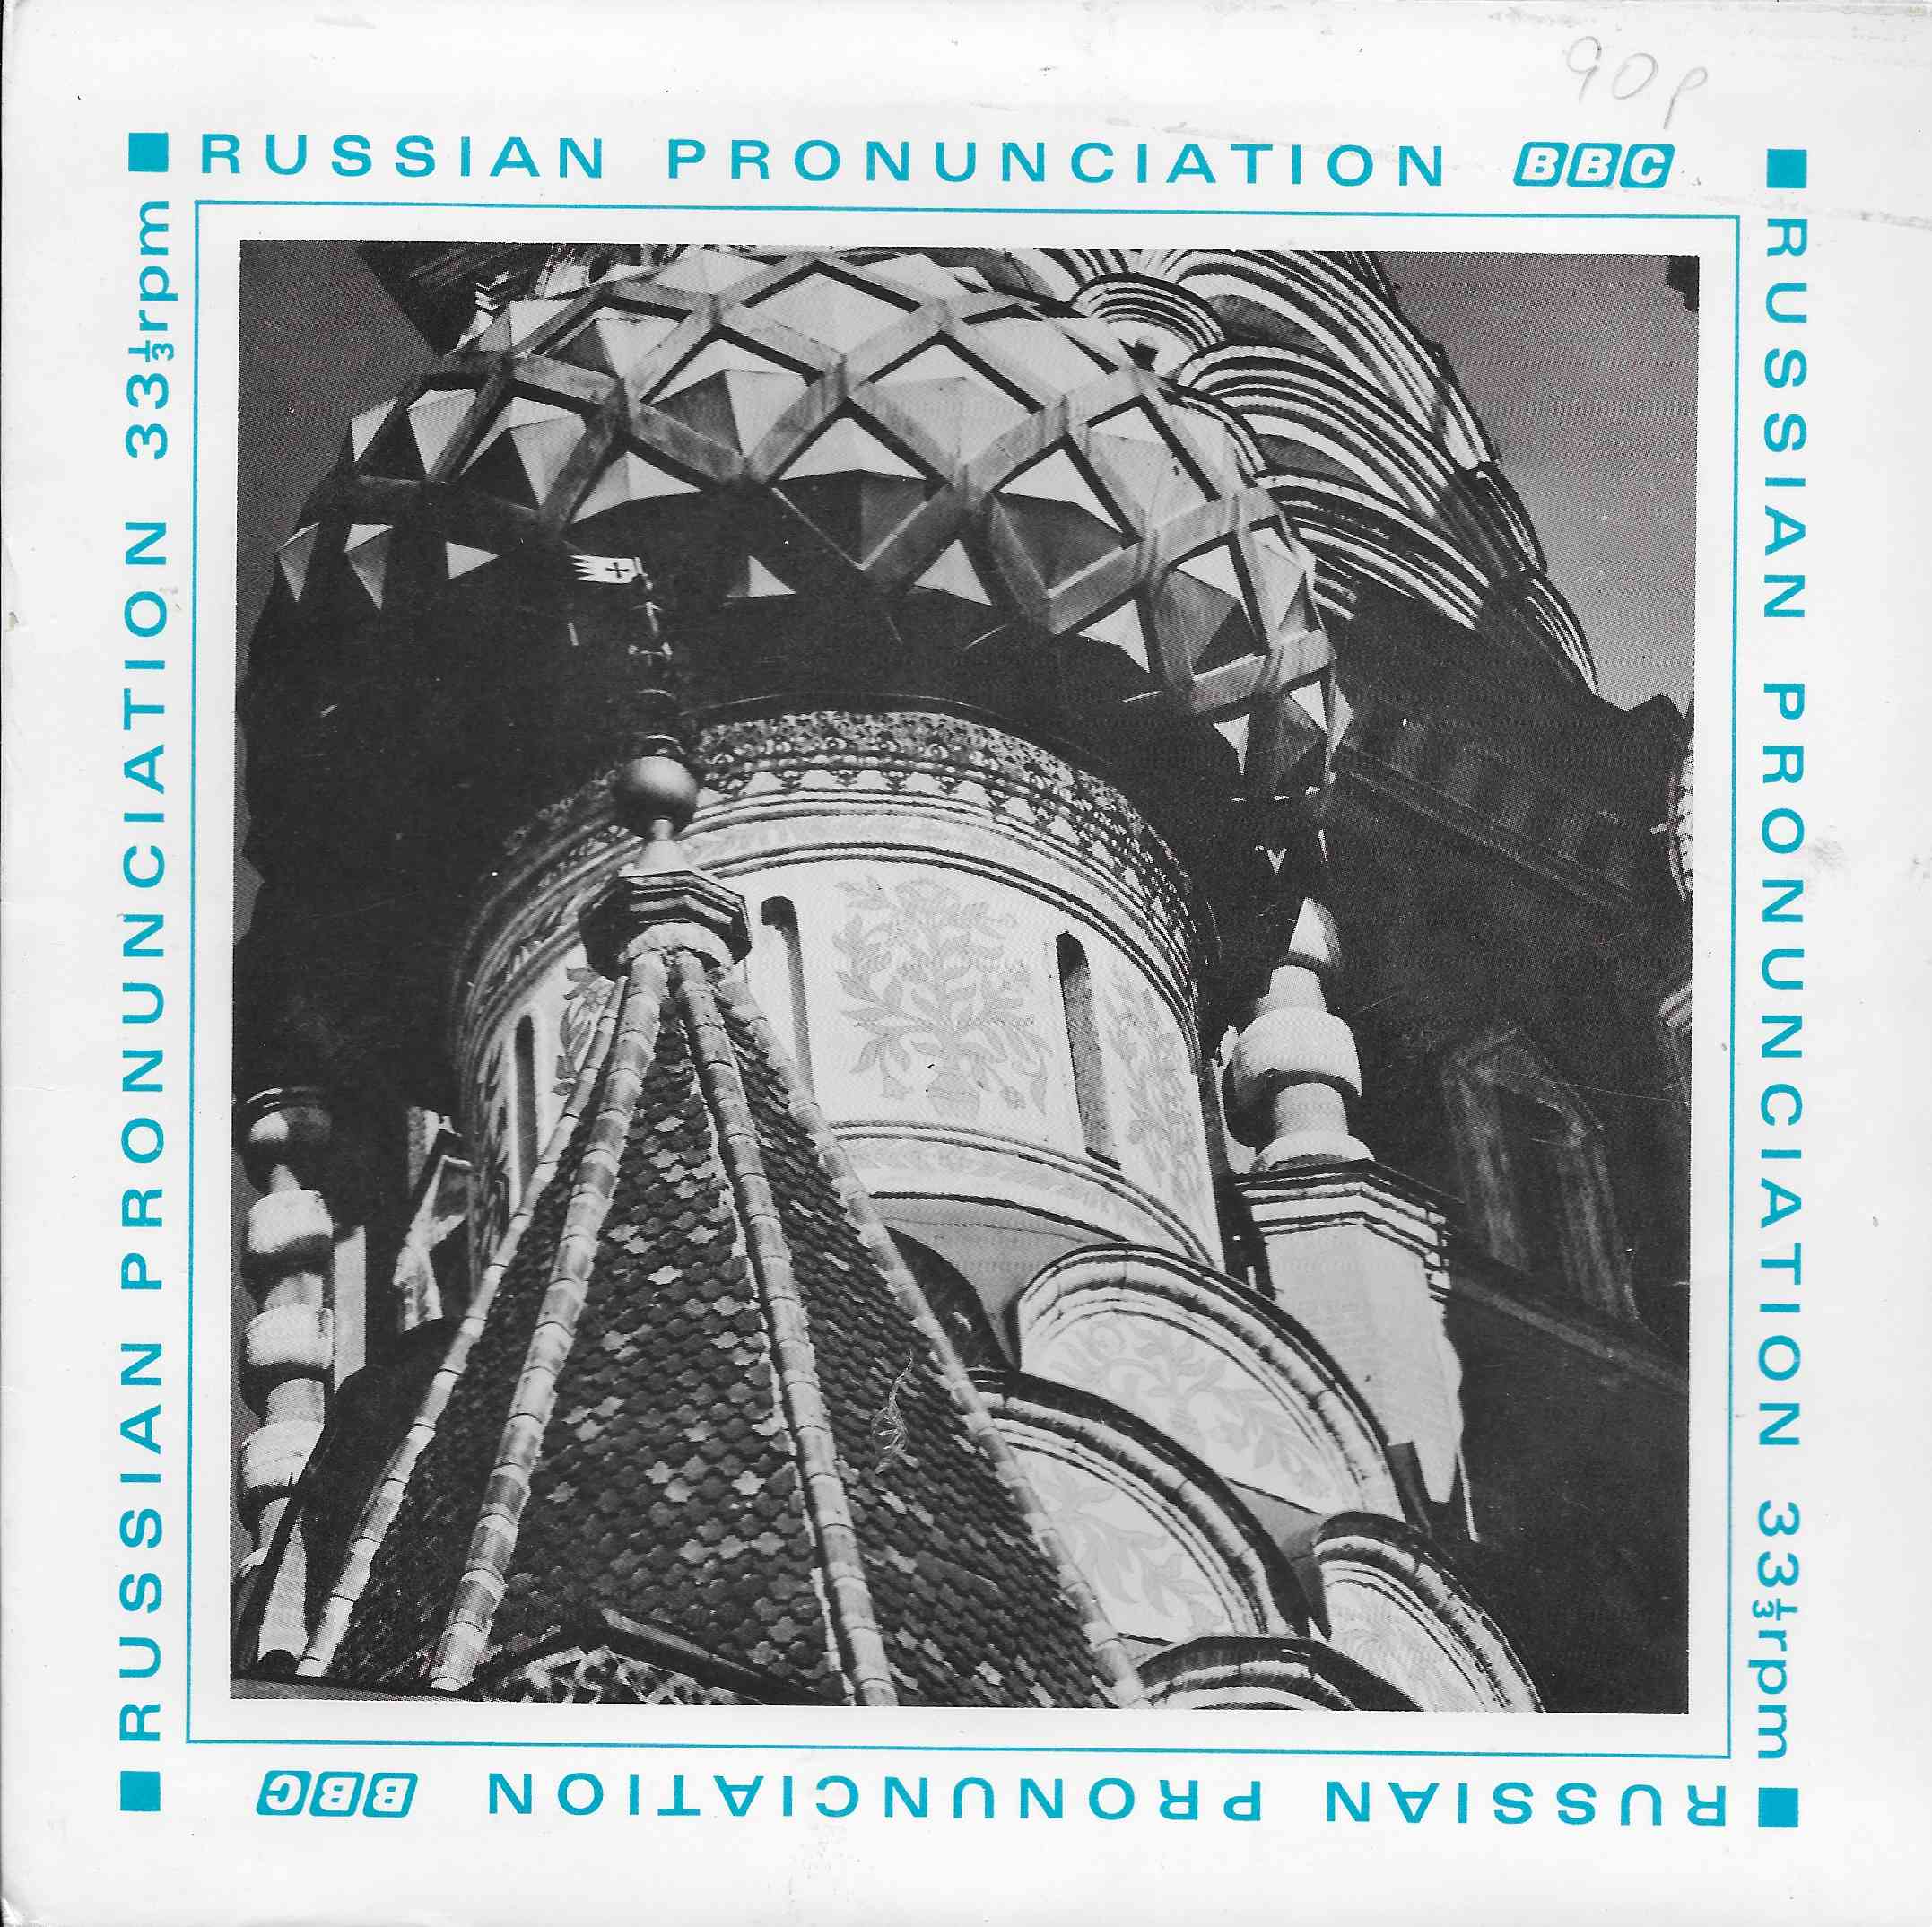 Picture of Russian pronunciation by artist Natalie Waterson from the BBC singles - Records and Tapes library